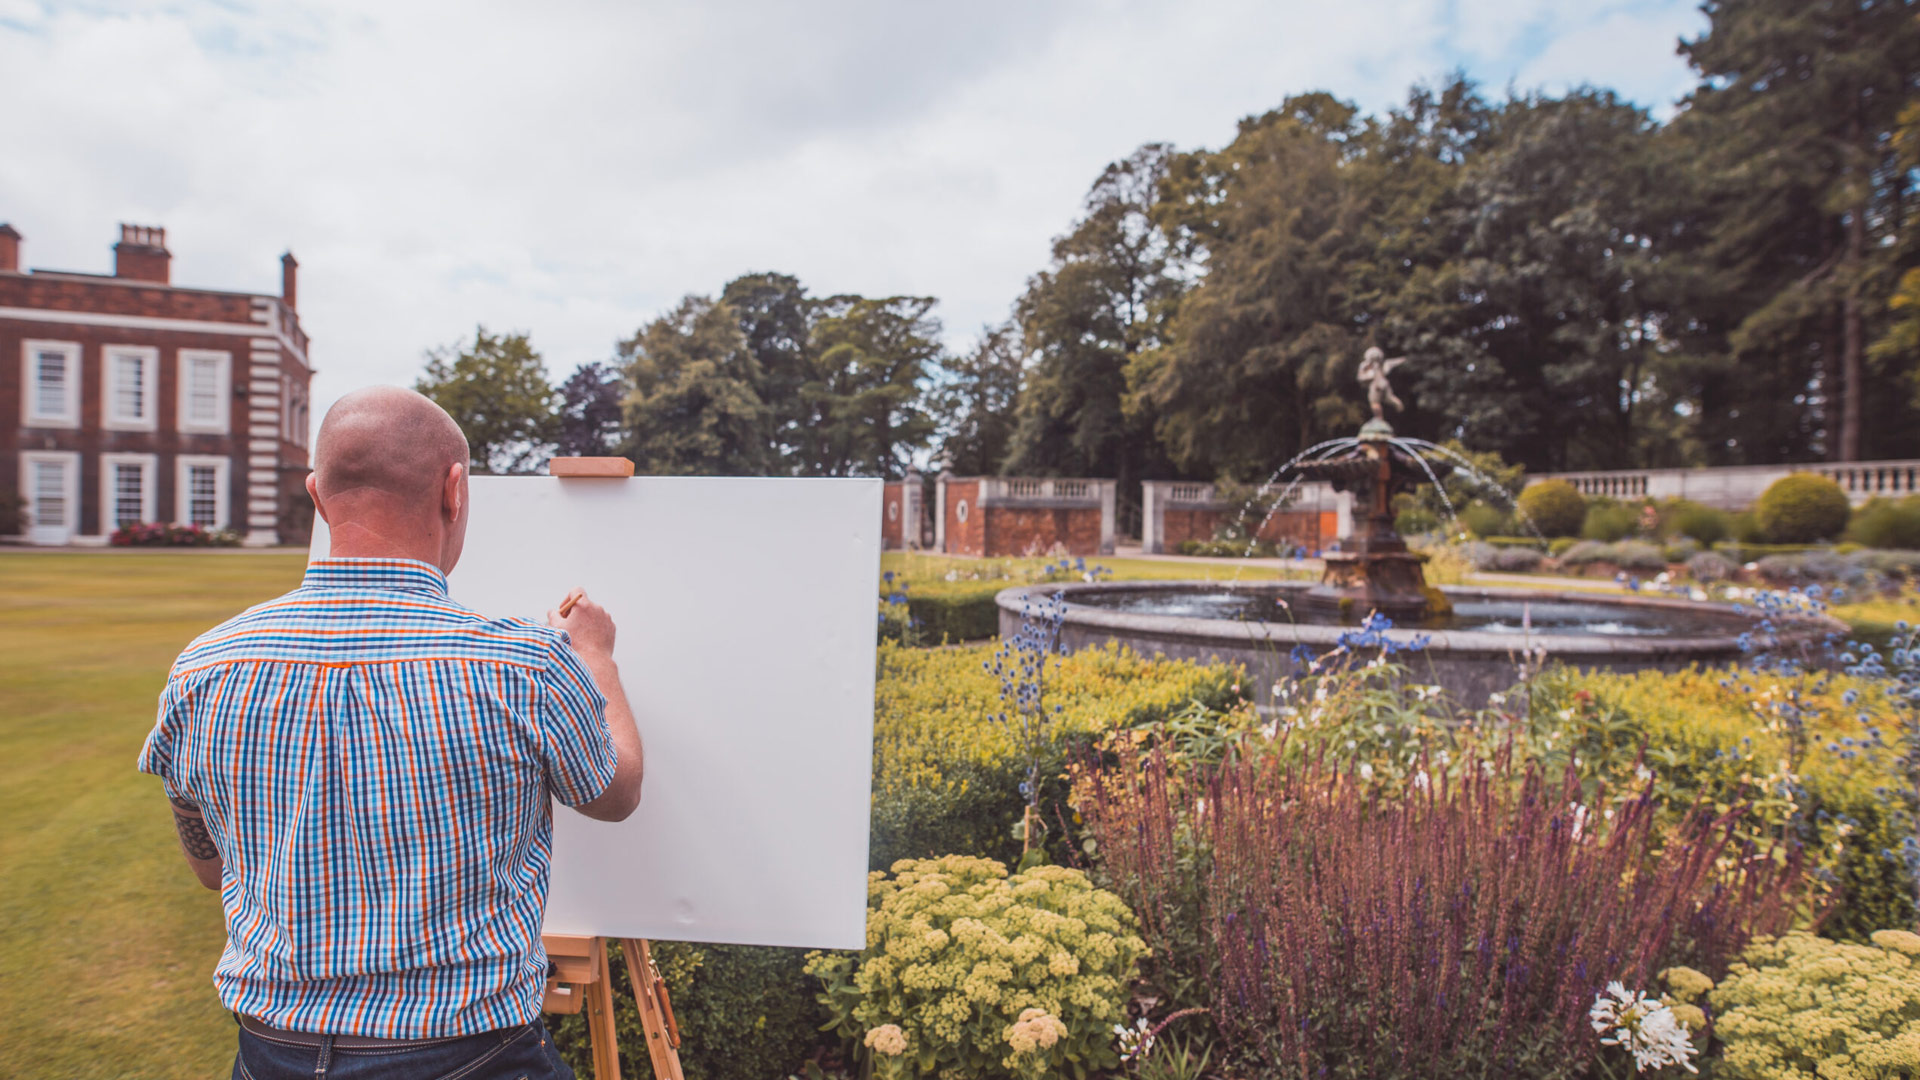 The back of a man with an easel and standing in beautiful gardens of Knowsley Hall with a running fountain ready to paint a picture